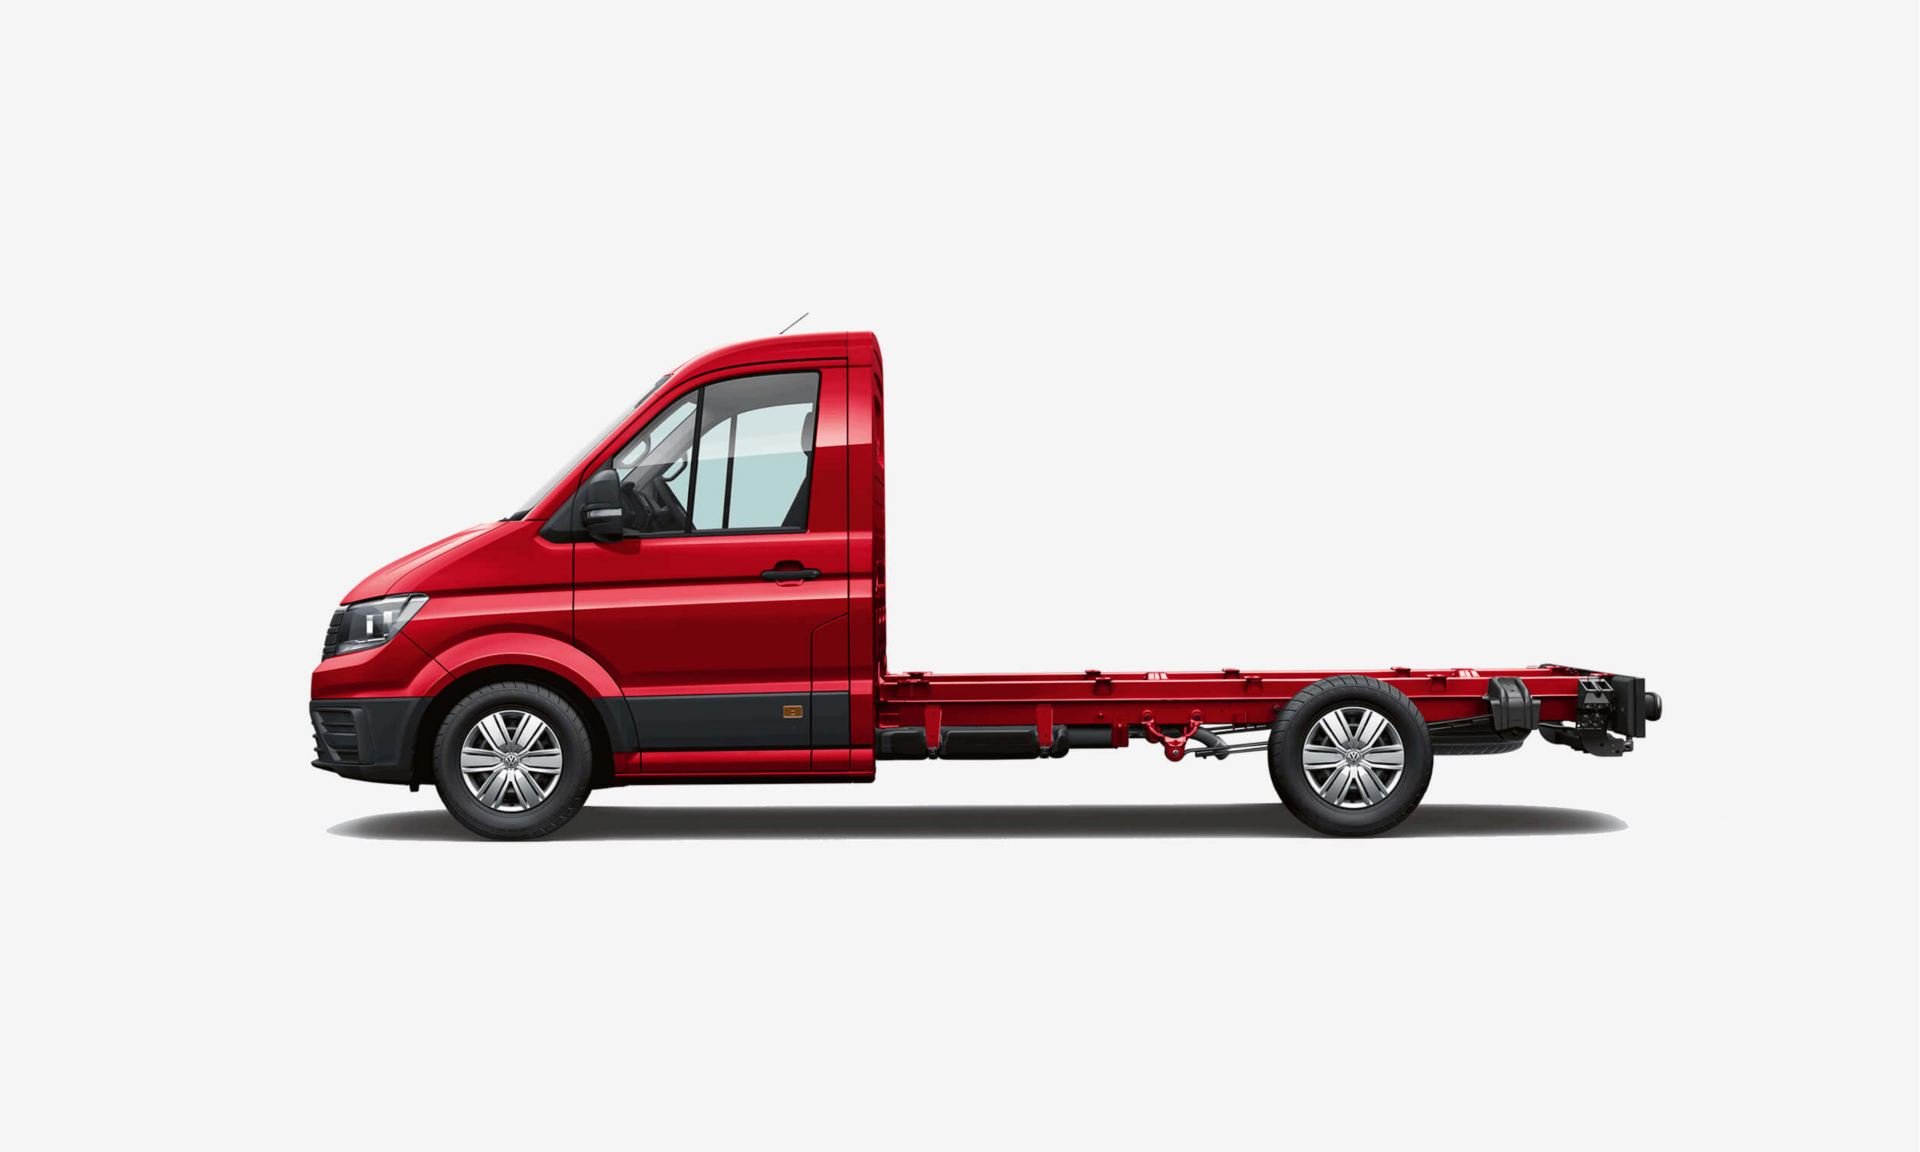 Volkswagen Crafter Chassis Cab side